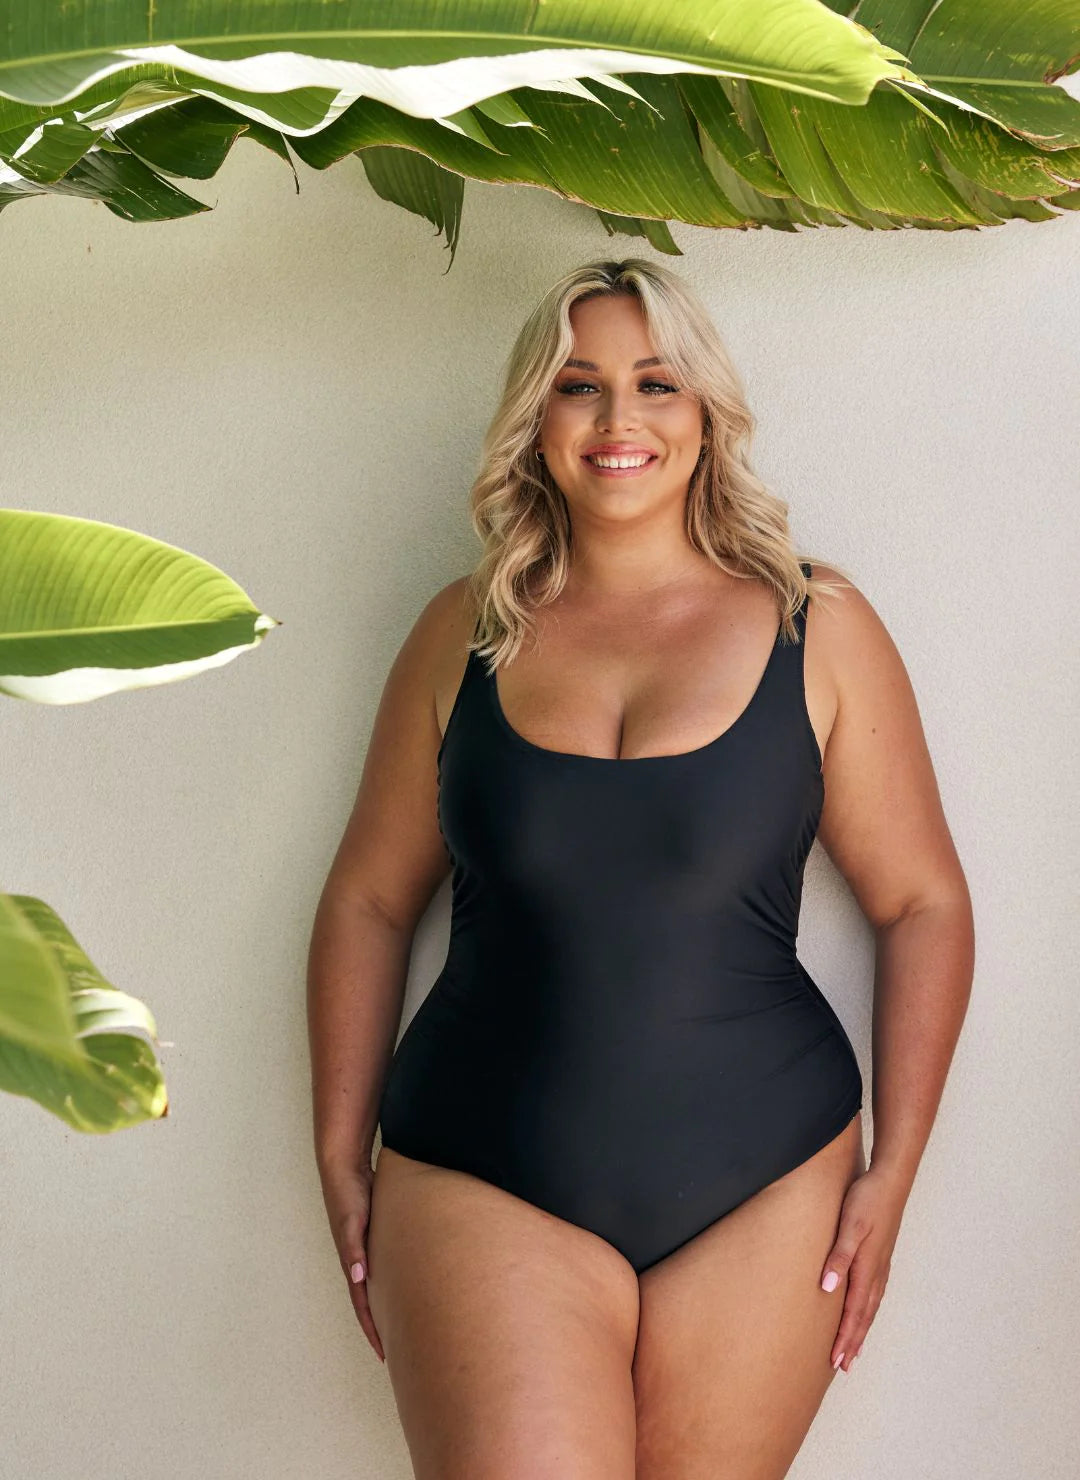 Shop Women's Plus Size Swimsuits Cover Ups in A Variety of Style